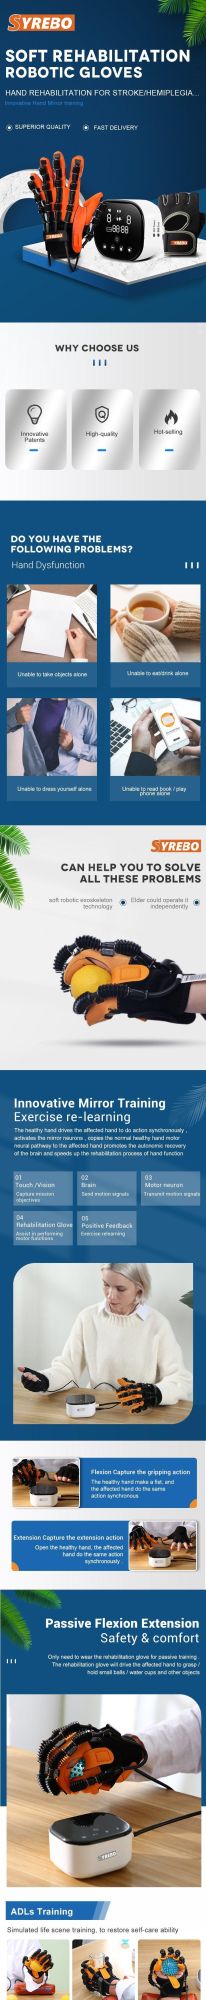 Stroke Patient Therapeutic Hand Exercise Rehabilitation Robot Glove Intermittent Pneumatic Compression